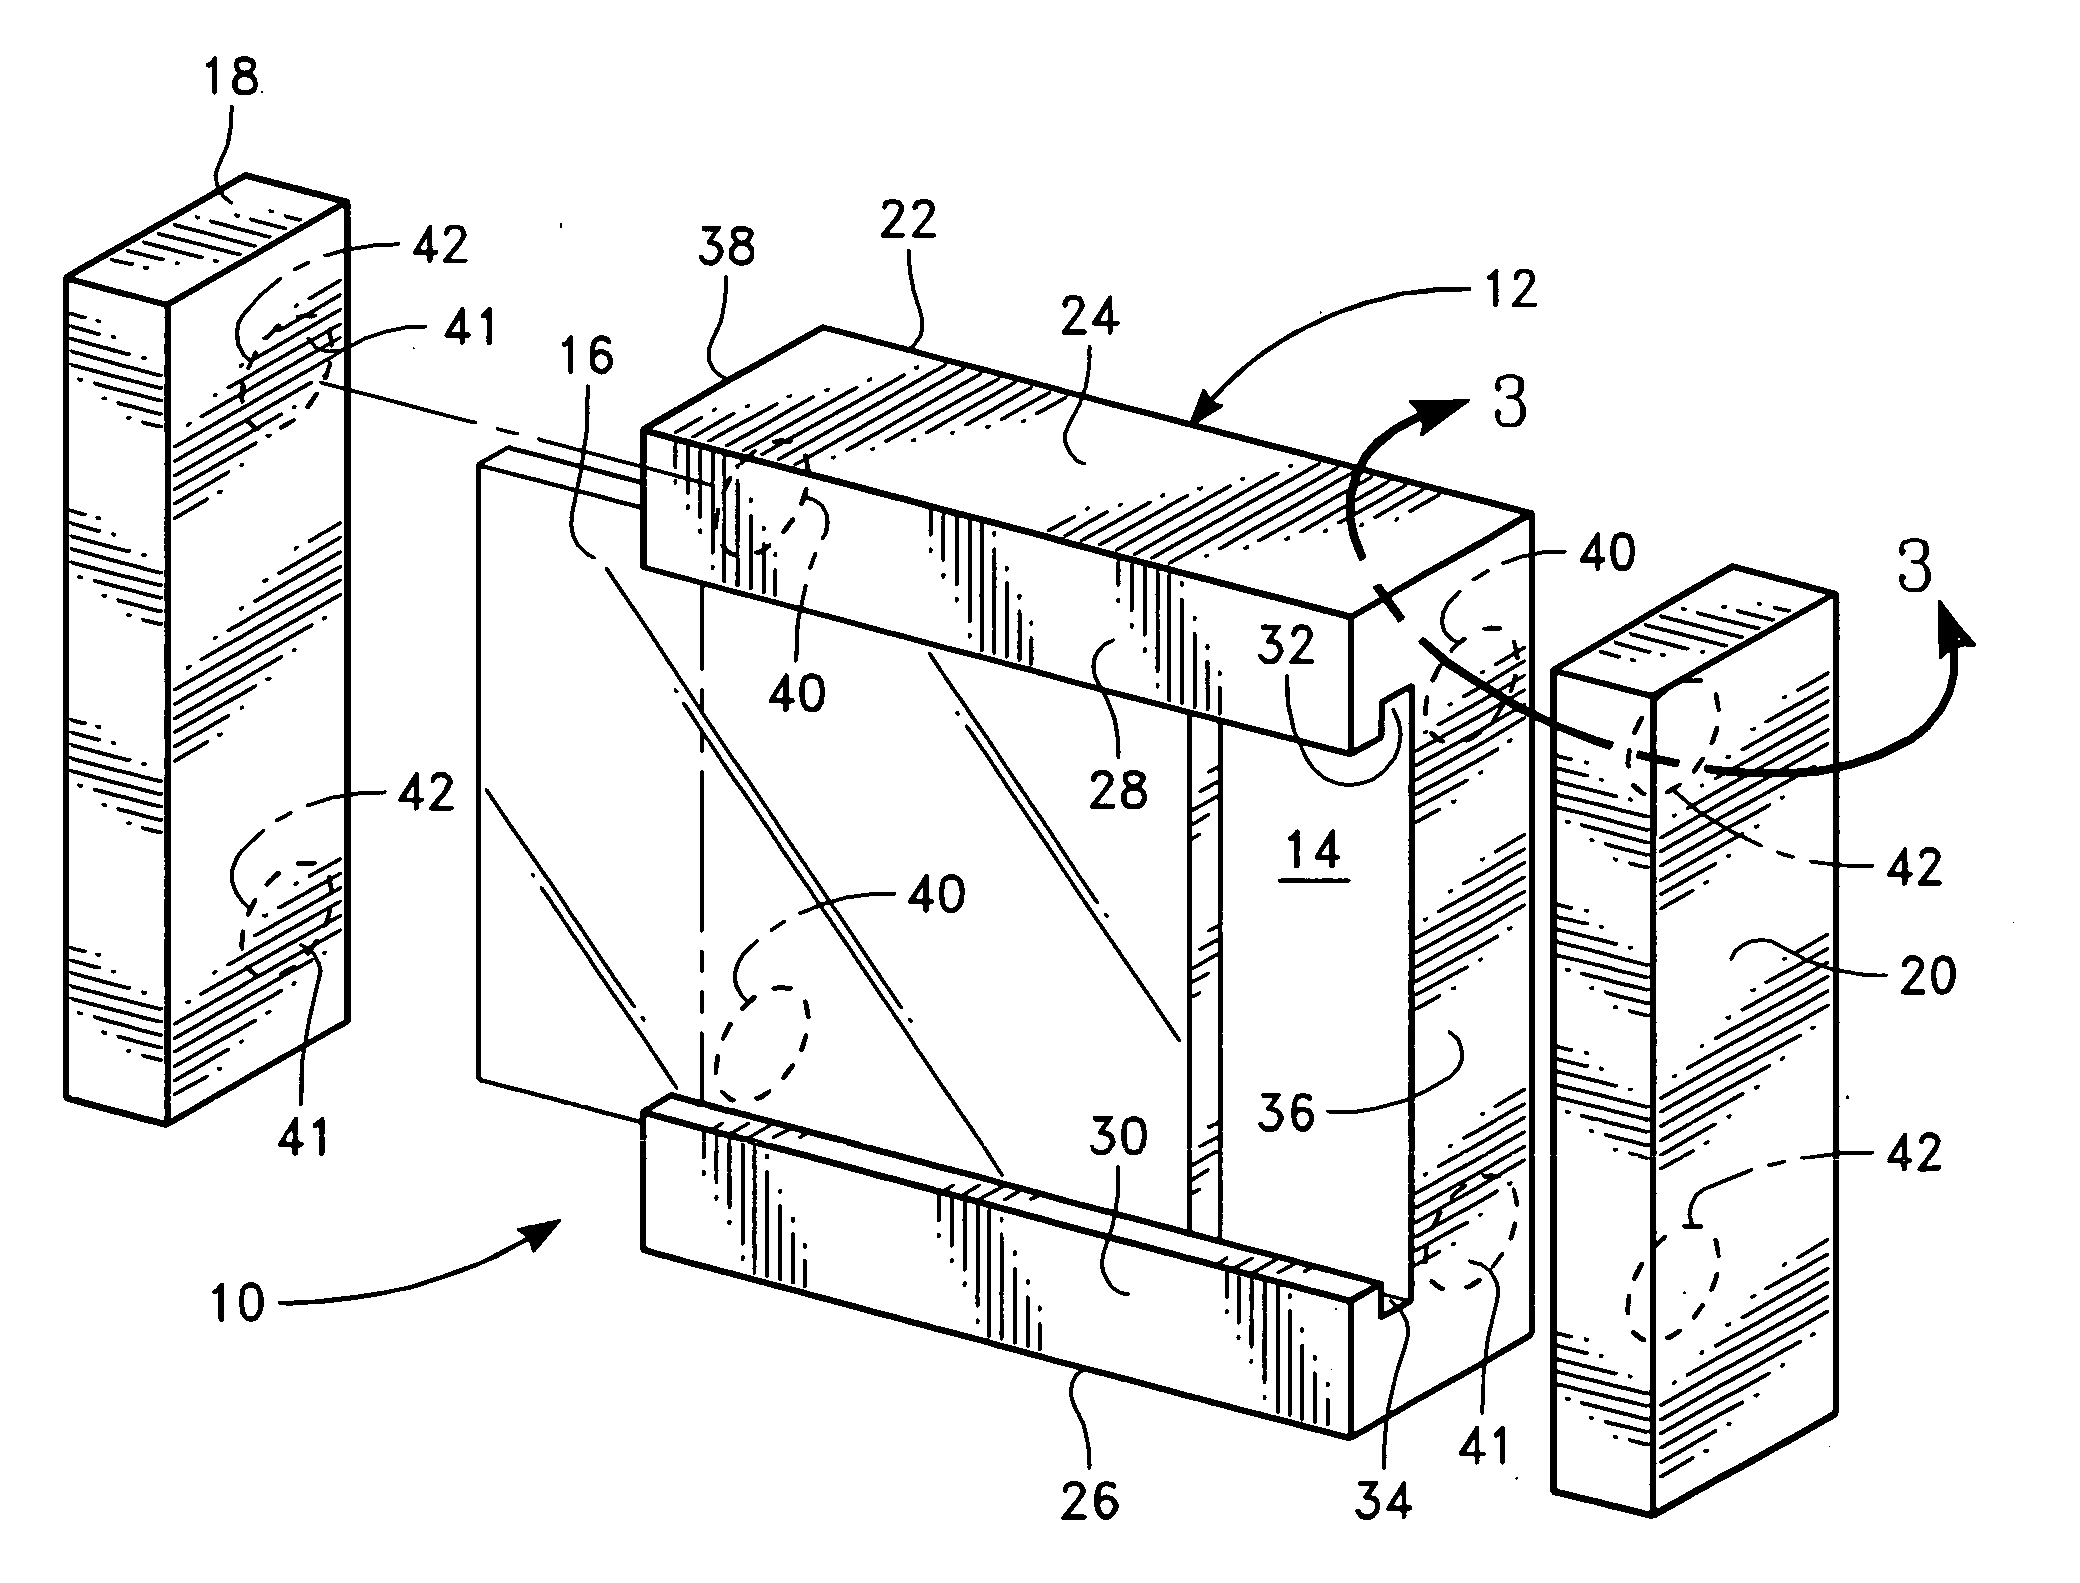 Magnetic modular assembly system for picture frame that includes specialized photography sequence and method of use